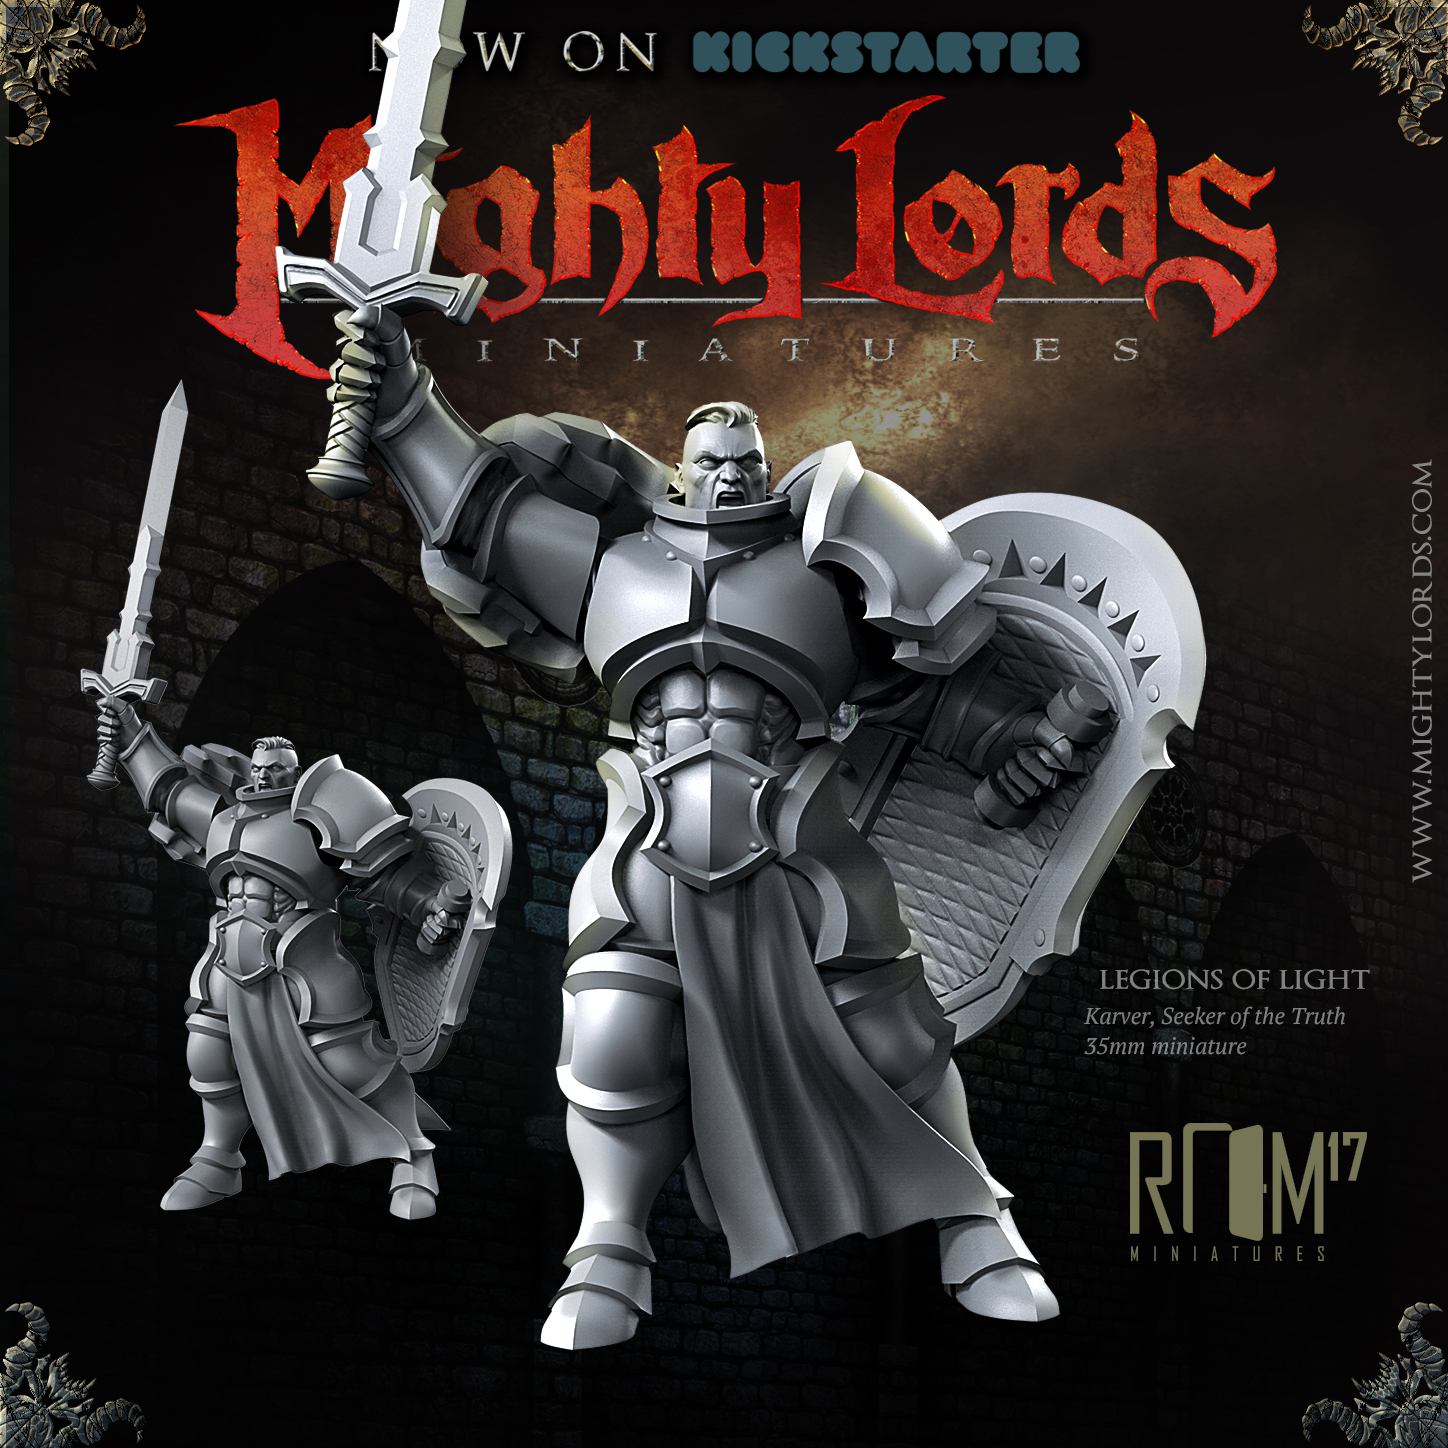 Mighty Lords announce New Sculpts!